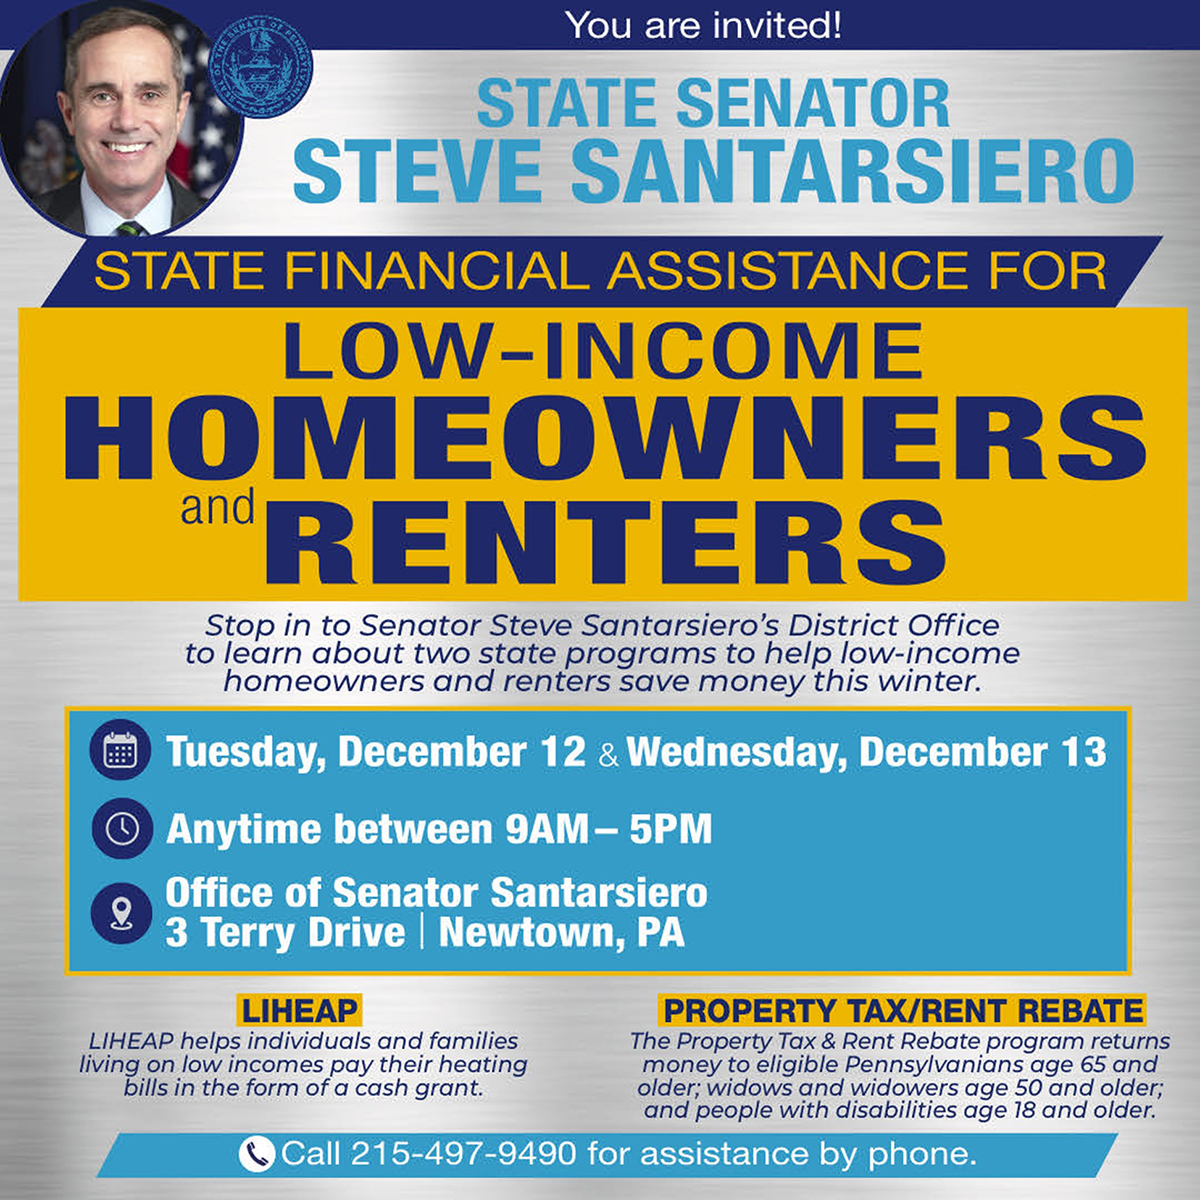 State Financial Assistance for Low-Income Homeowners & Renters